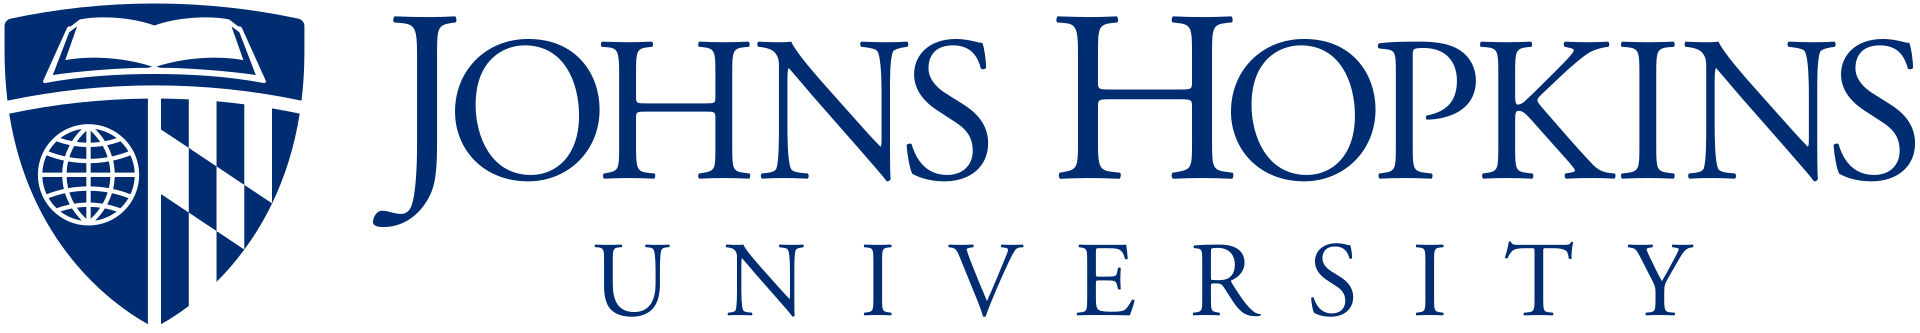 Johns Hopkins University logo, By Source, Fair use, http://en.wikipedia.org/w/index.php?curid=52649215"